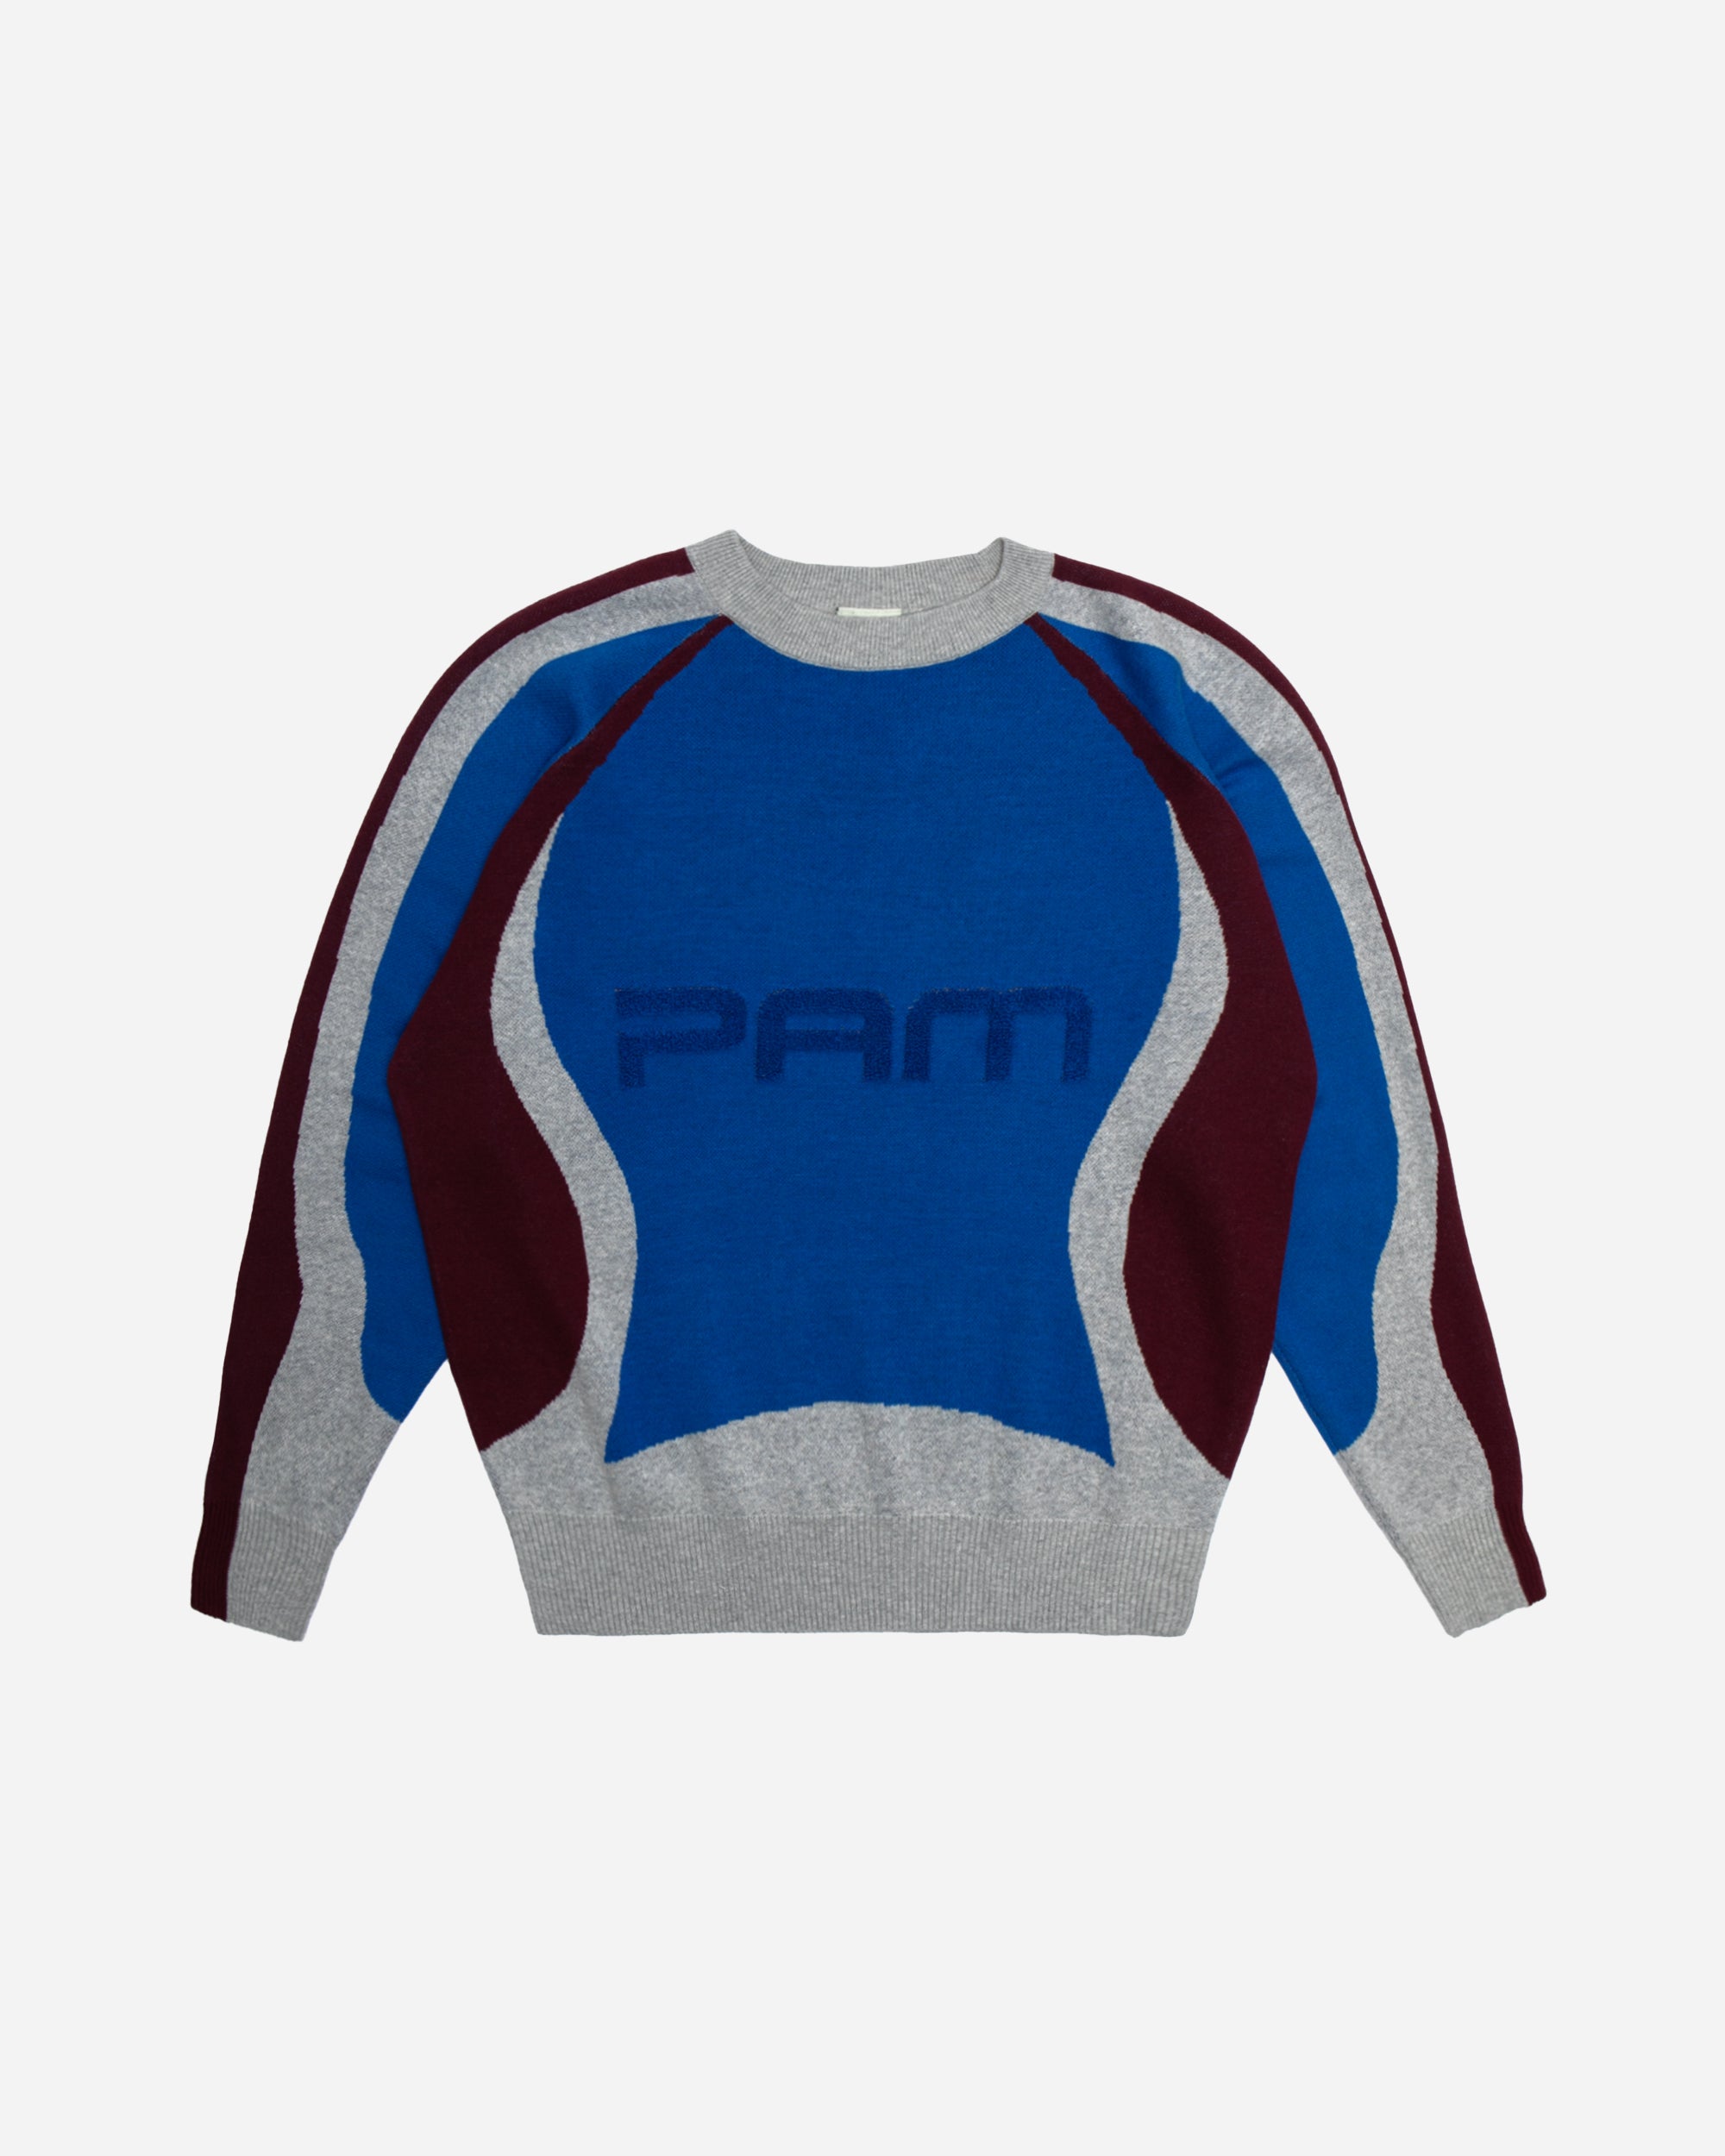 Smooth Graphic Knitwear